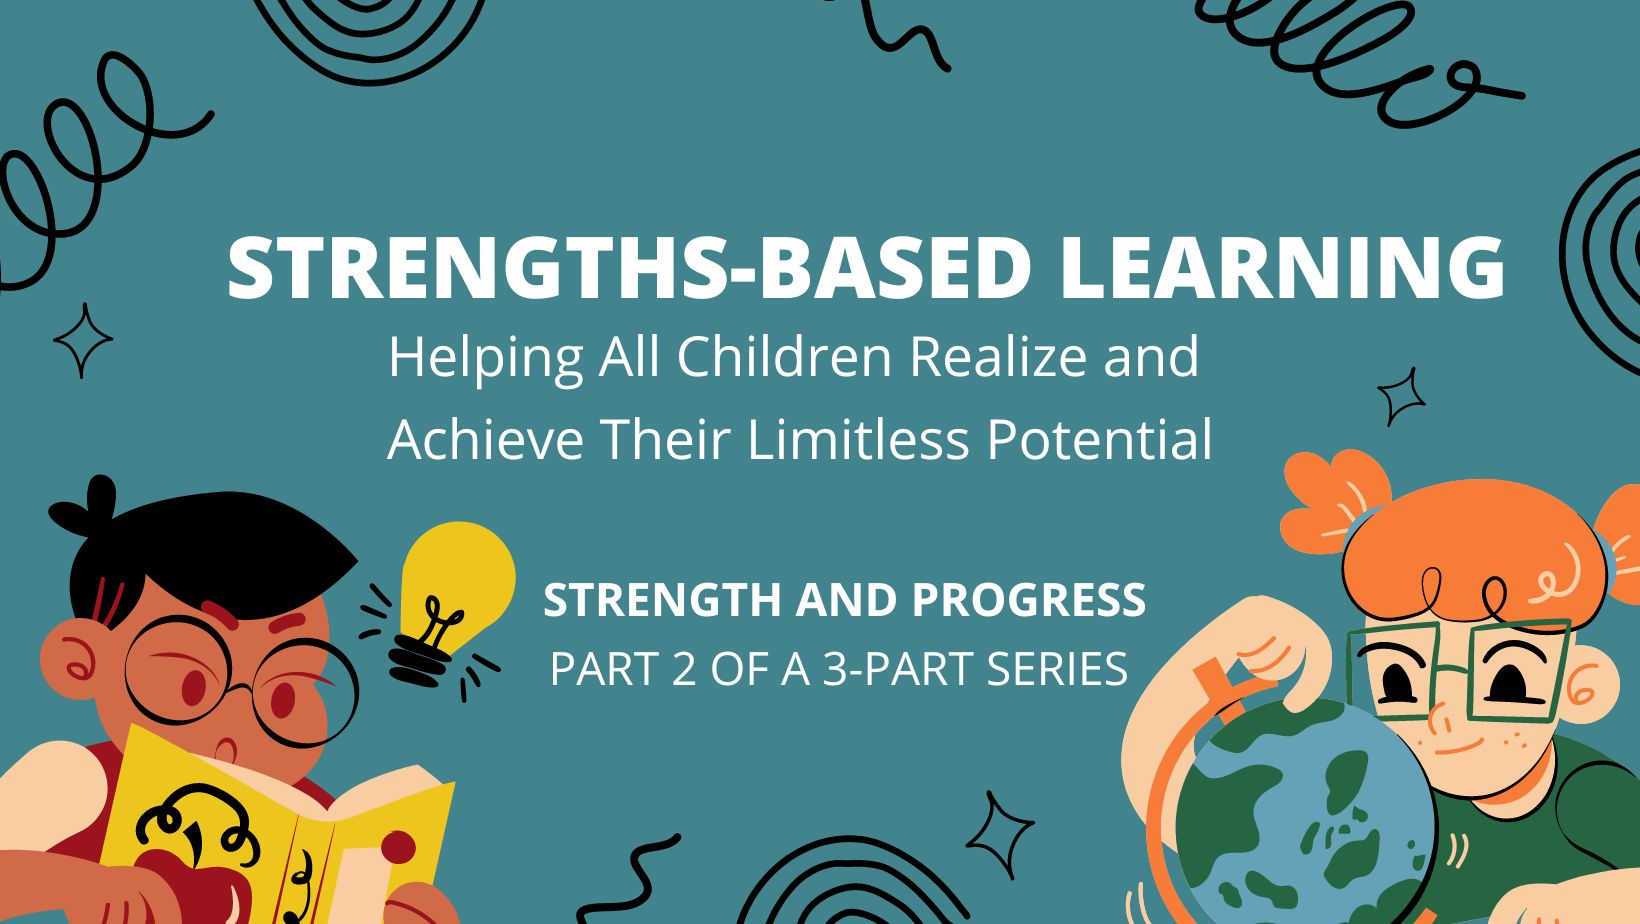 Strengths Based Learning: Helping all Children realize and achieve their limitless potential